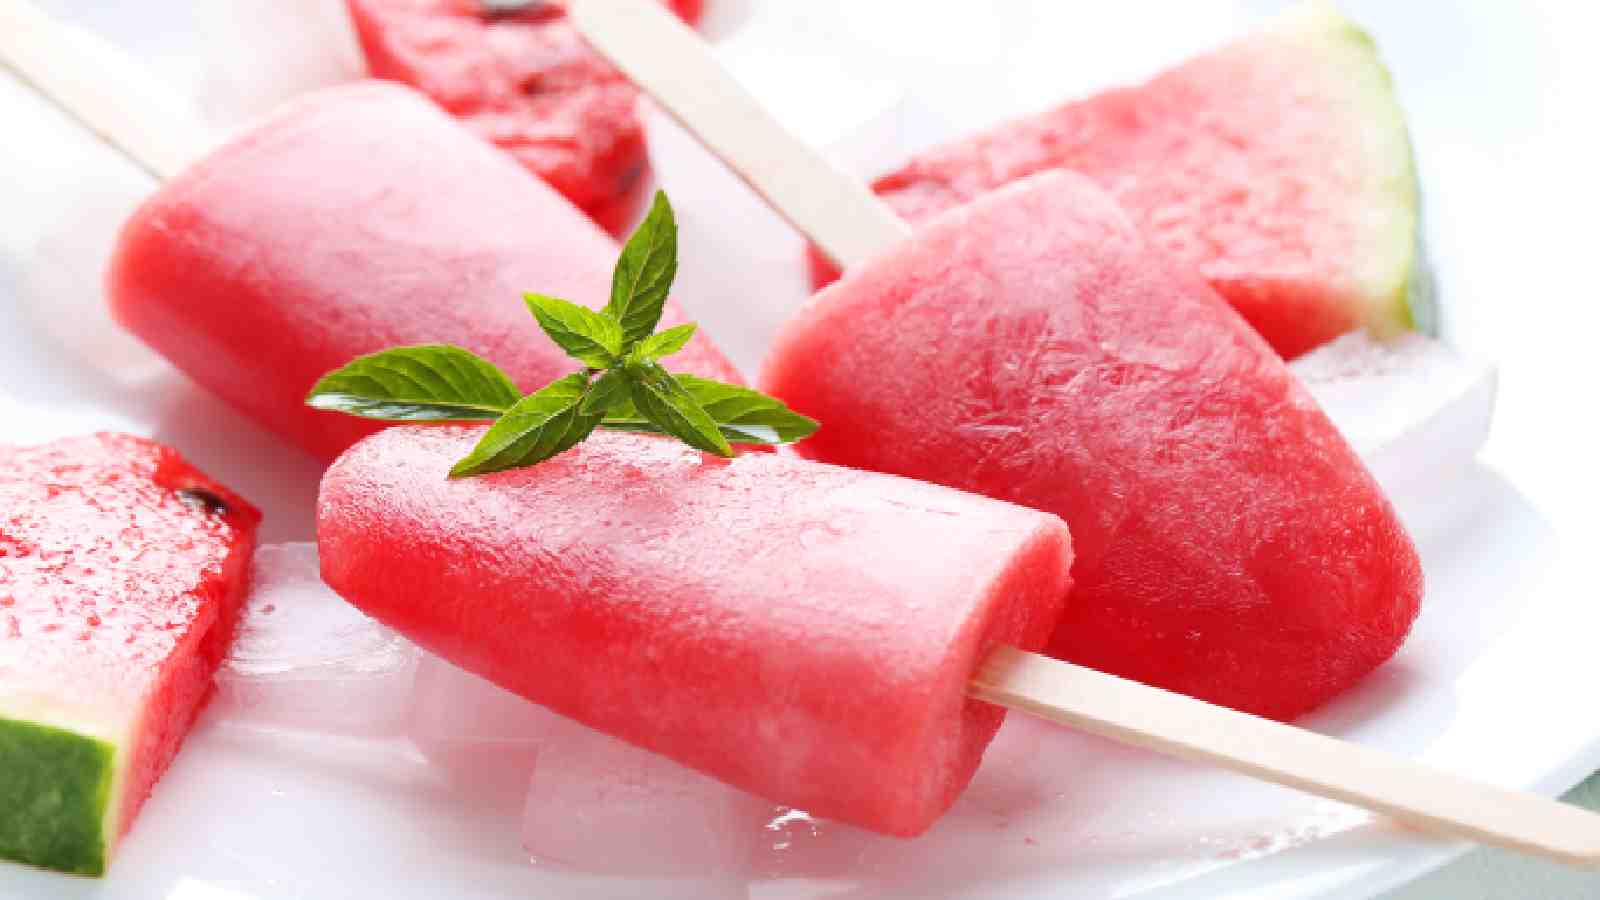 5 ways to include healthy watermelon in your summer diet